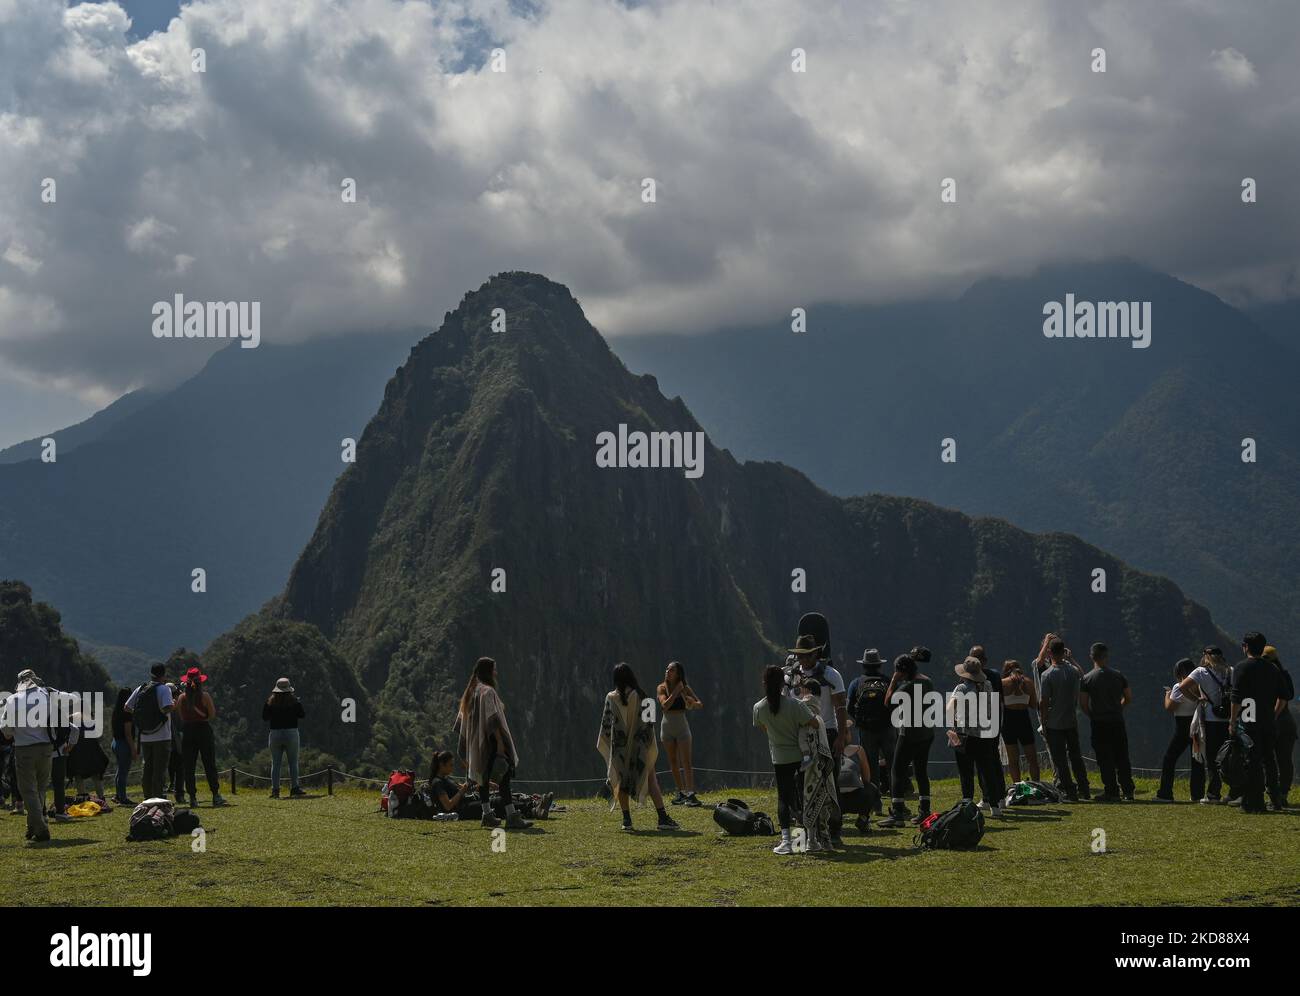 Tourists take pictures of the ancient Inca city of Machu Picchu located in the Andes at an altitude of 2,430 meters (7,970 feet). The most famous icon of the Inca civilization was declared a Peruvian Historical Sanctuary in 1981, a UNESCO World Heritage Site in 1983, and in 2007 was then declared one of the Seven New Wonders of the World. On Wednesday, 20 April 2022, in Historic Sanctuary of Machu Picchu, Urubamba Province, Peru. (Photo by Artur Widak/NurPhoto) Stock Photo